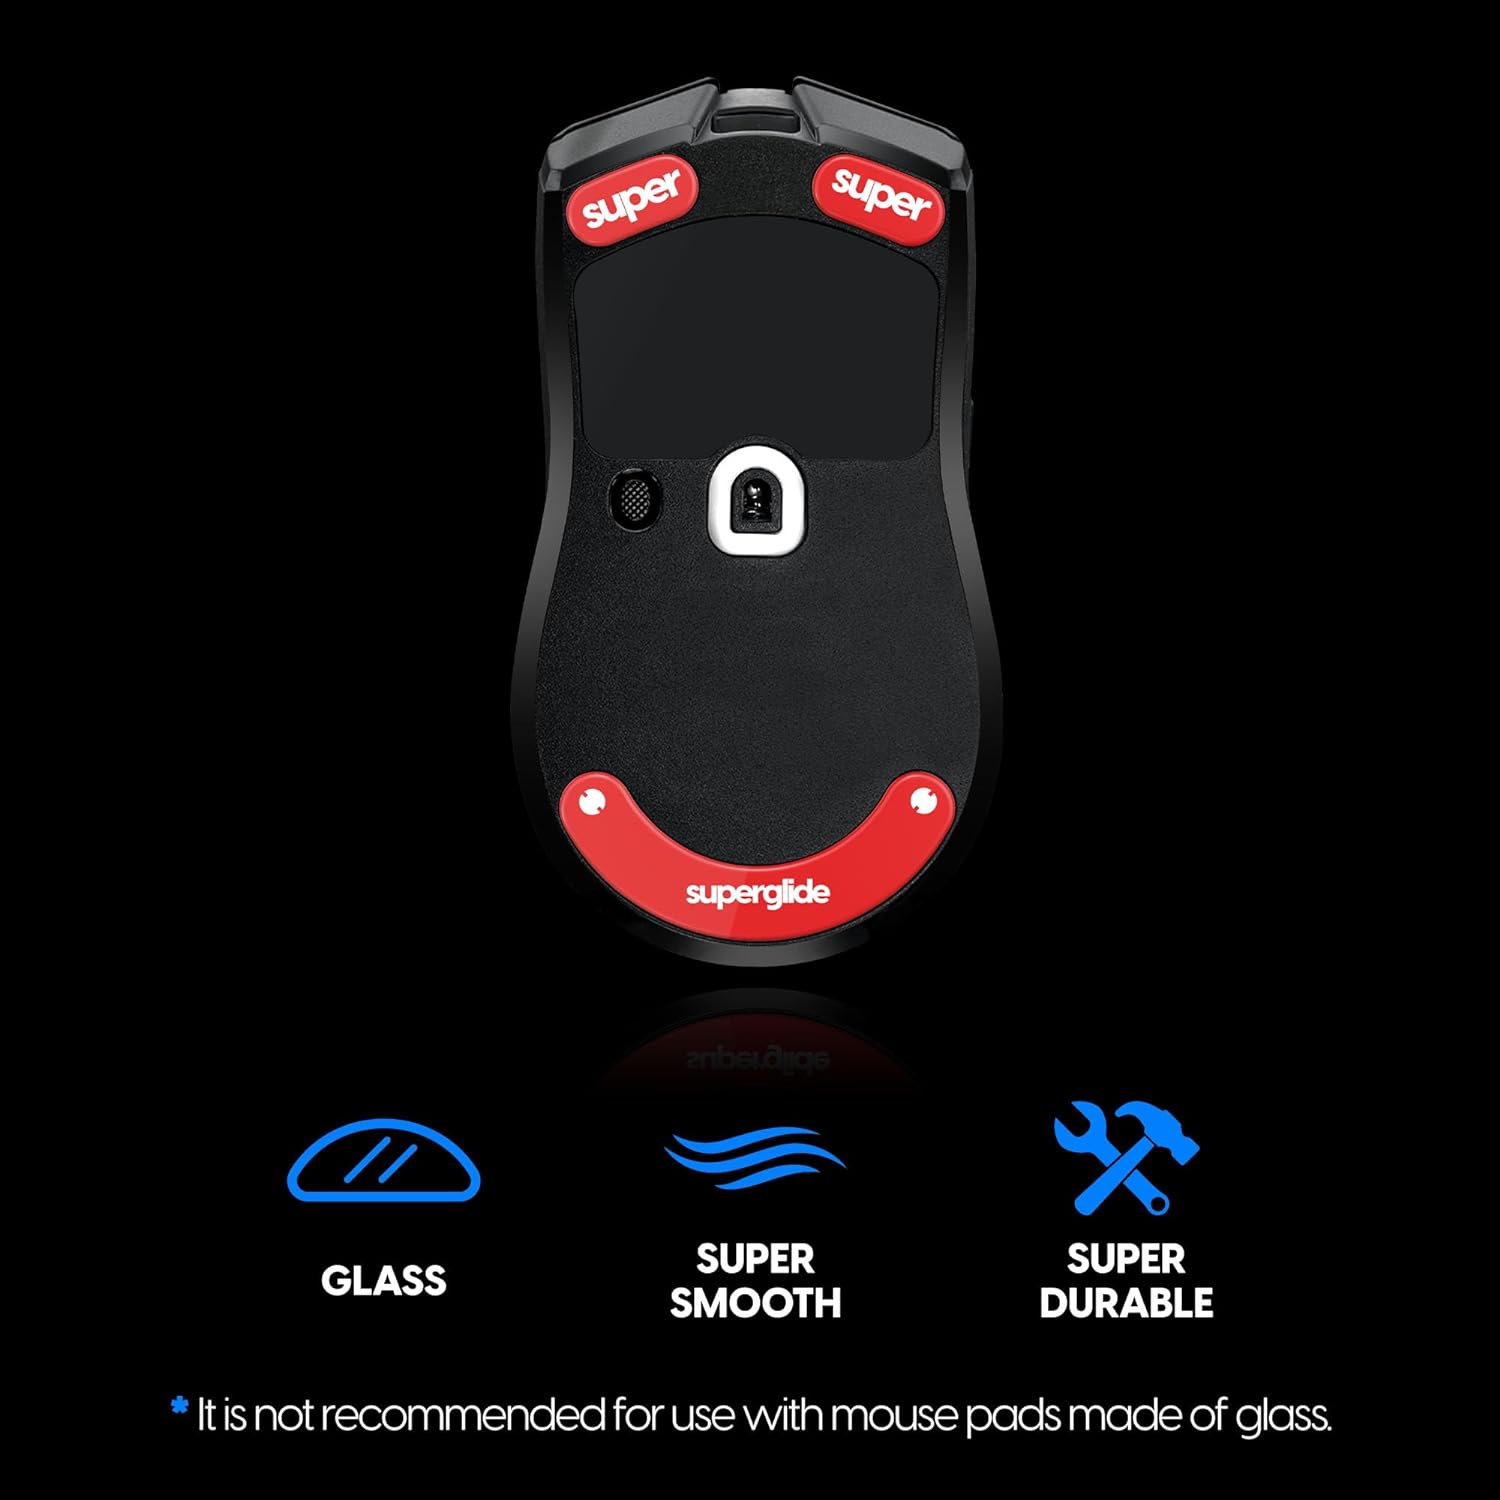 A large marketing image providing additional information about the product Pulsar Superglide 2 Mouse Skate for Razer Viper V2 Pro - Red - Additional alt info not provided